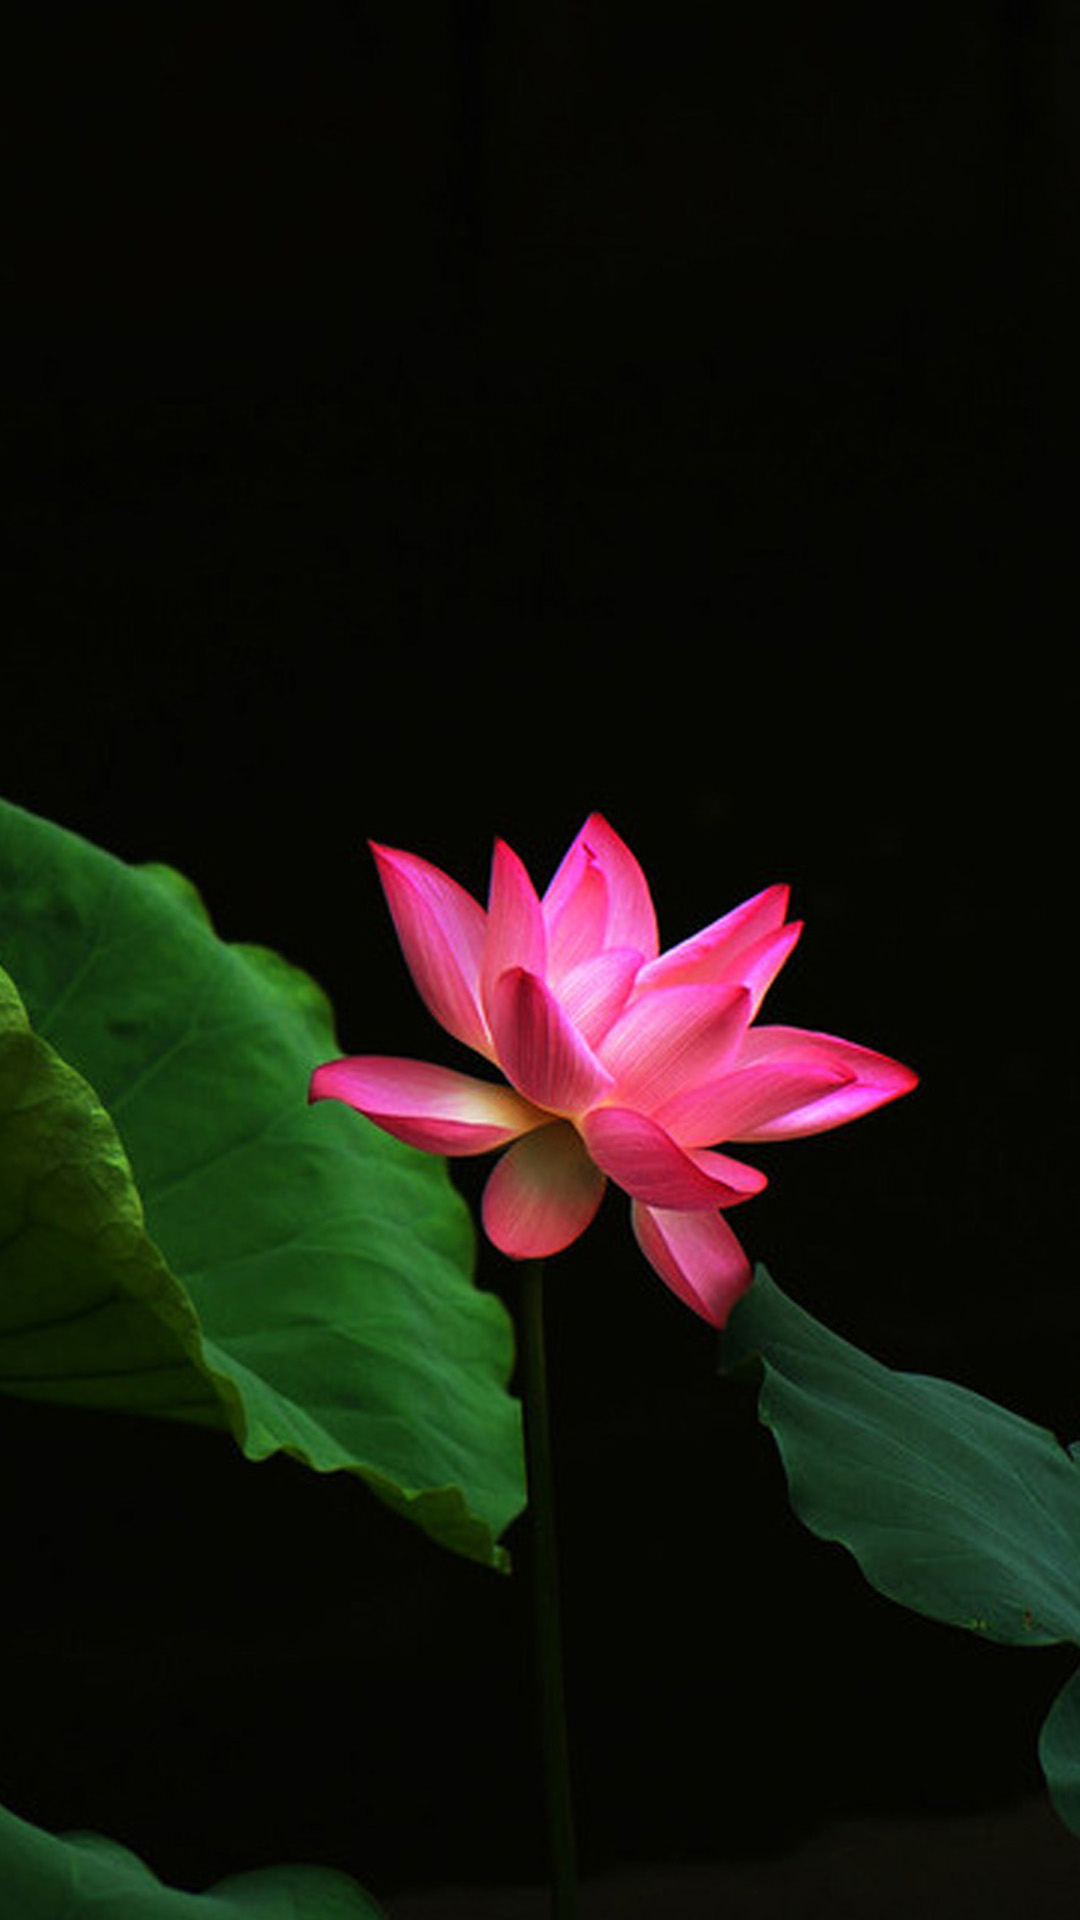 Free Download Red Lotus Flower Galaxy Note 3 Wallpapers 1080x1920 Images, Photos, Reviews